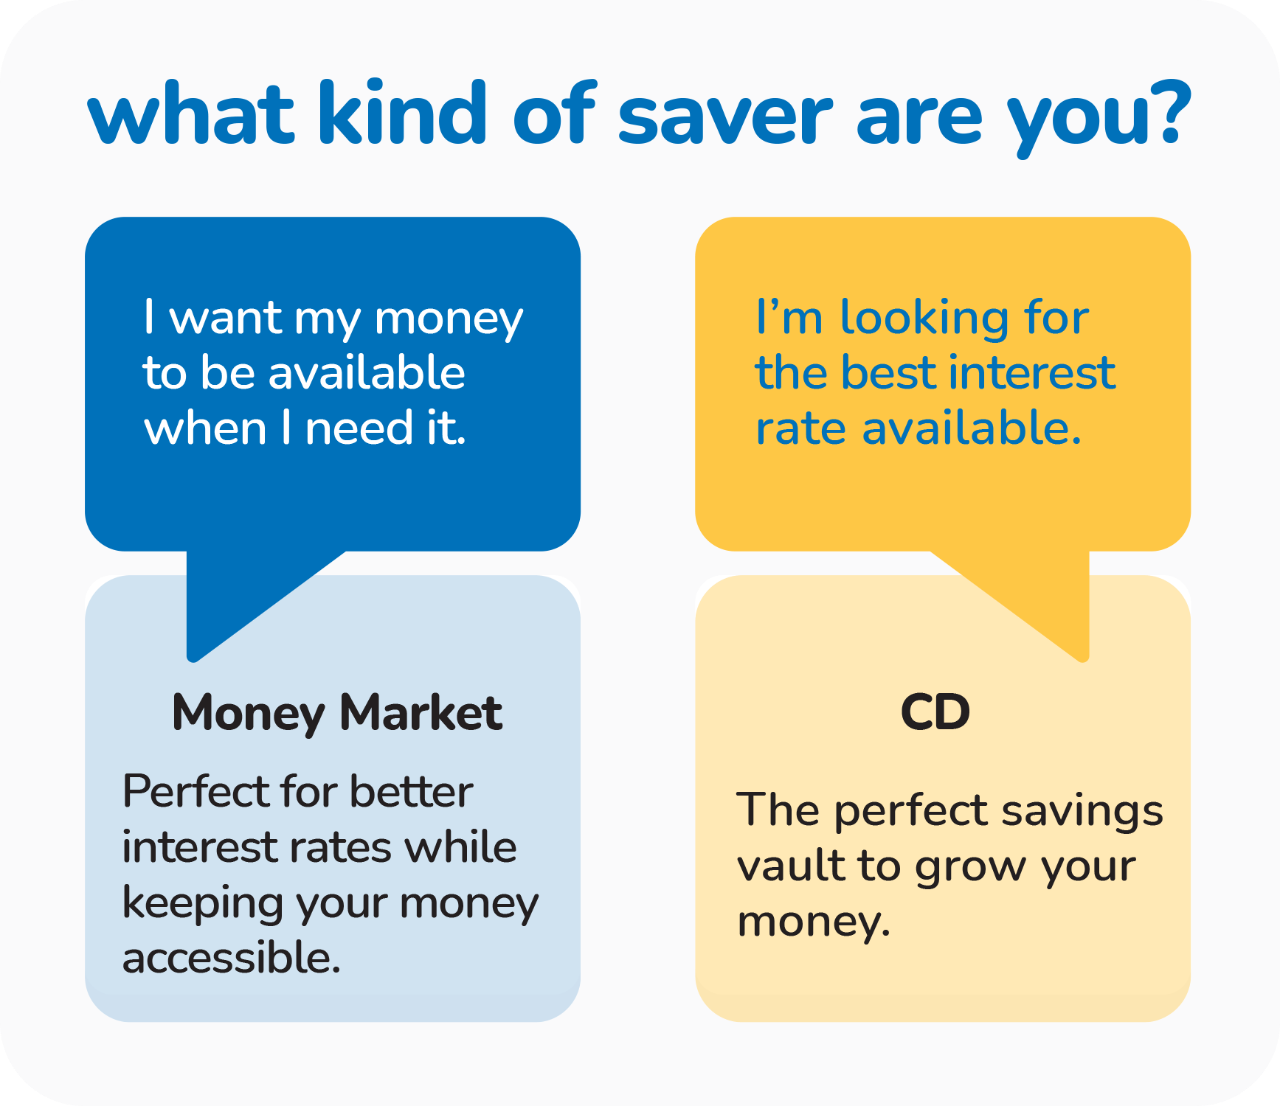 Graphic comparing CD and money market benefits and different types of savers